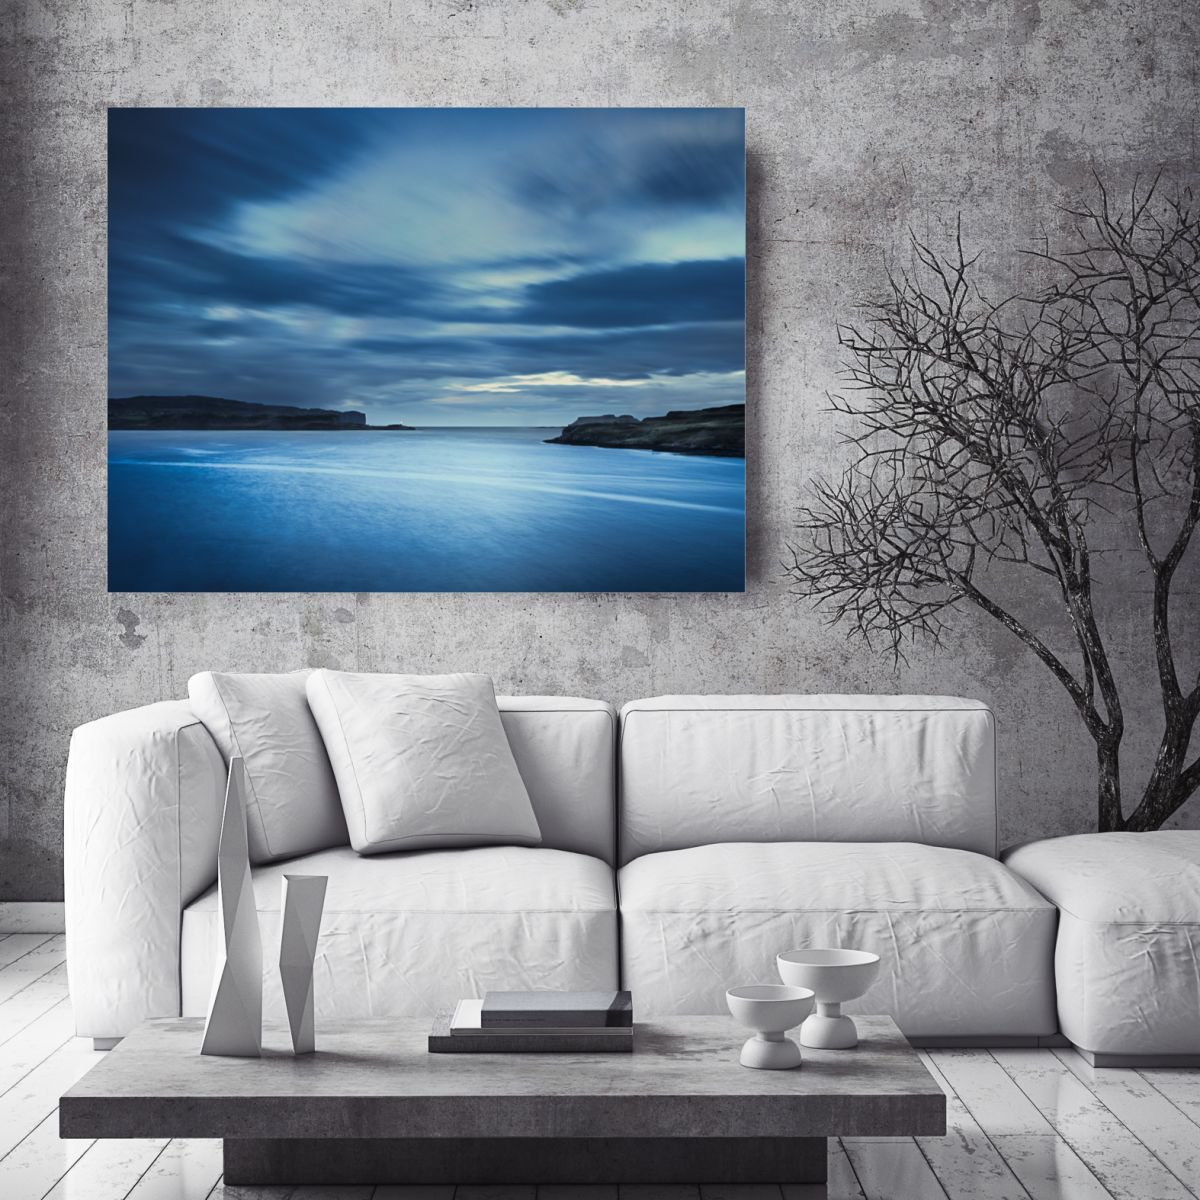 Fly Away Dreams - Extra large blue dawn 60 x 40 inches Canvas by Lynne Douglas